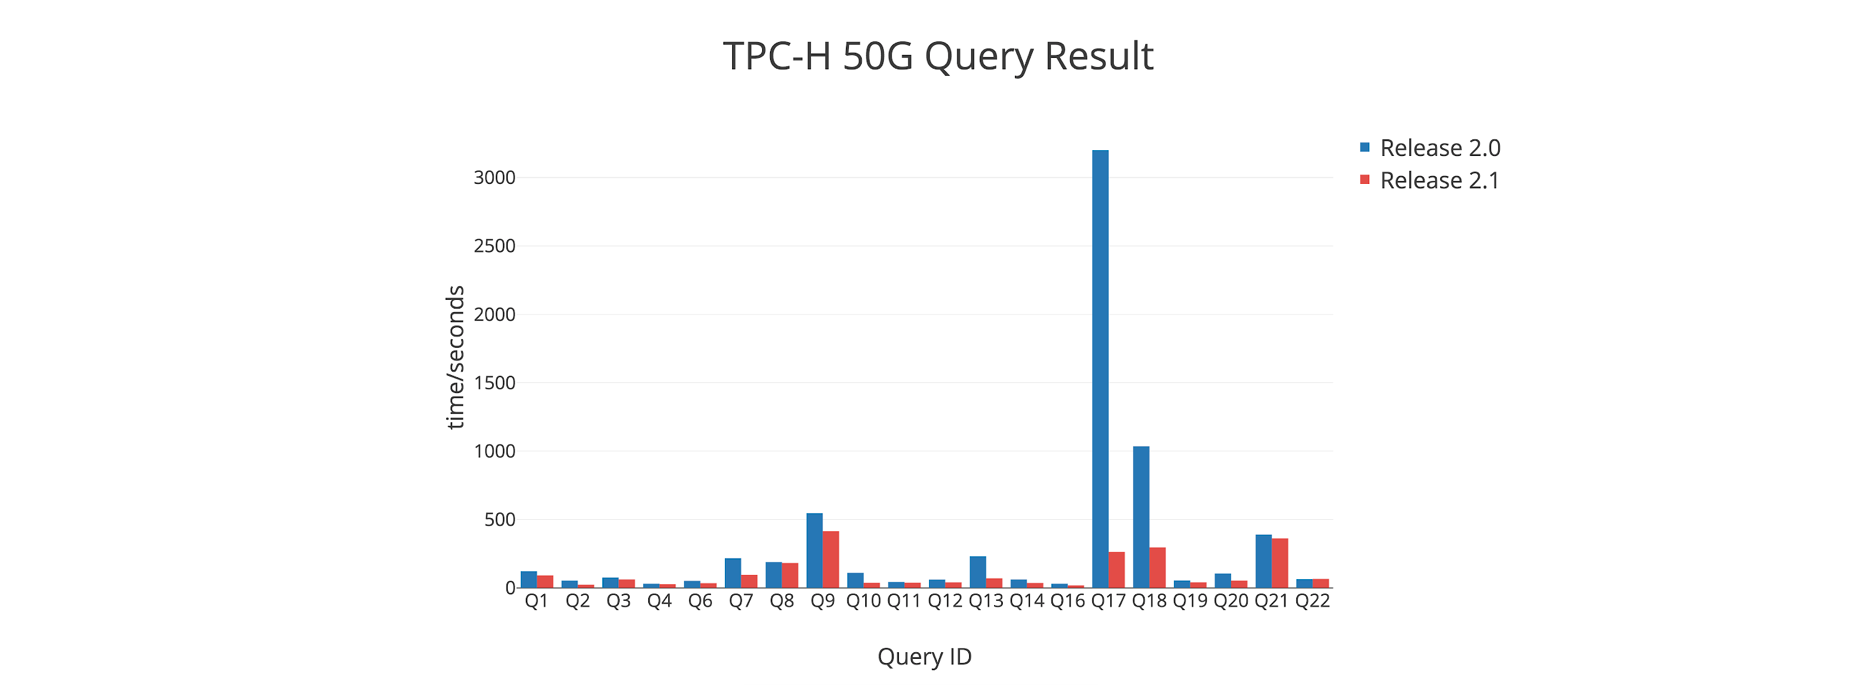 TPC-H 50G query result